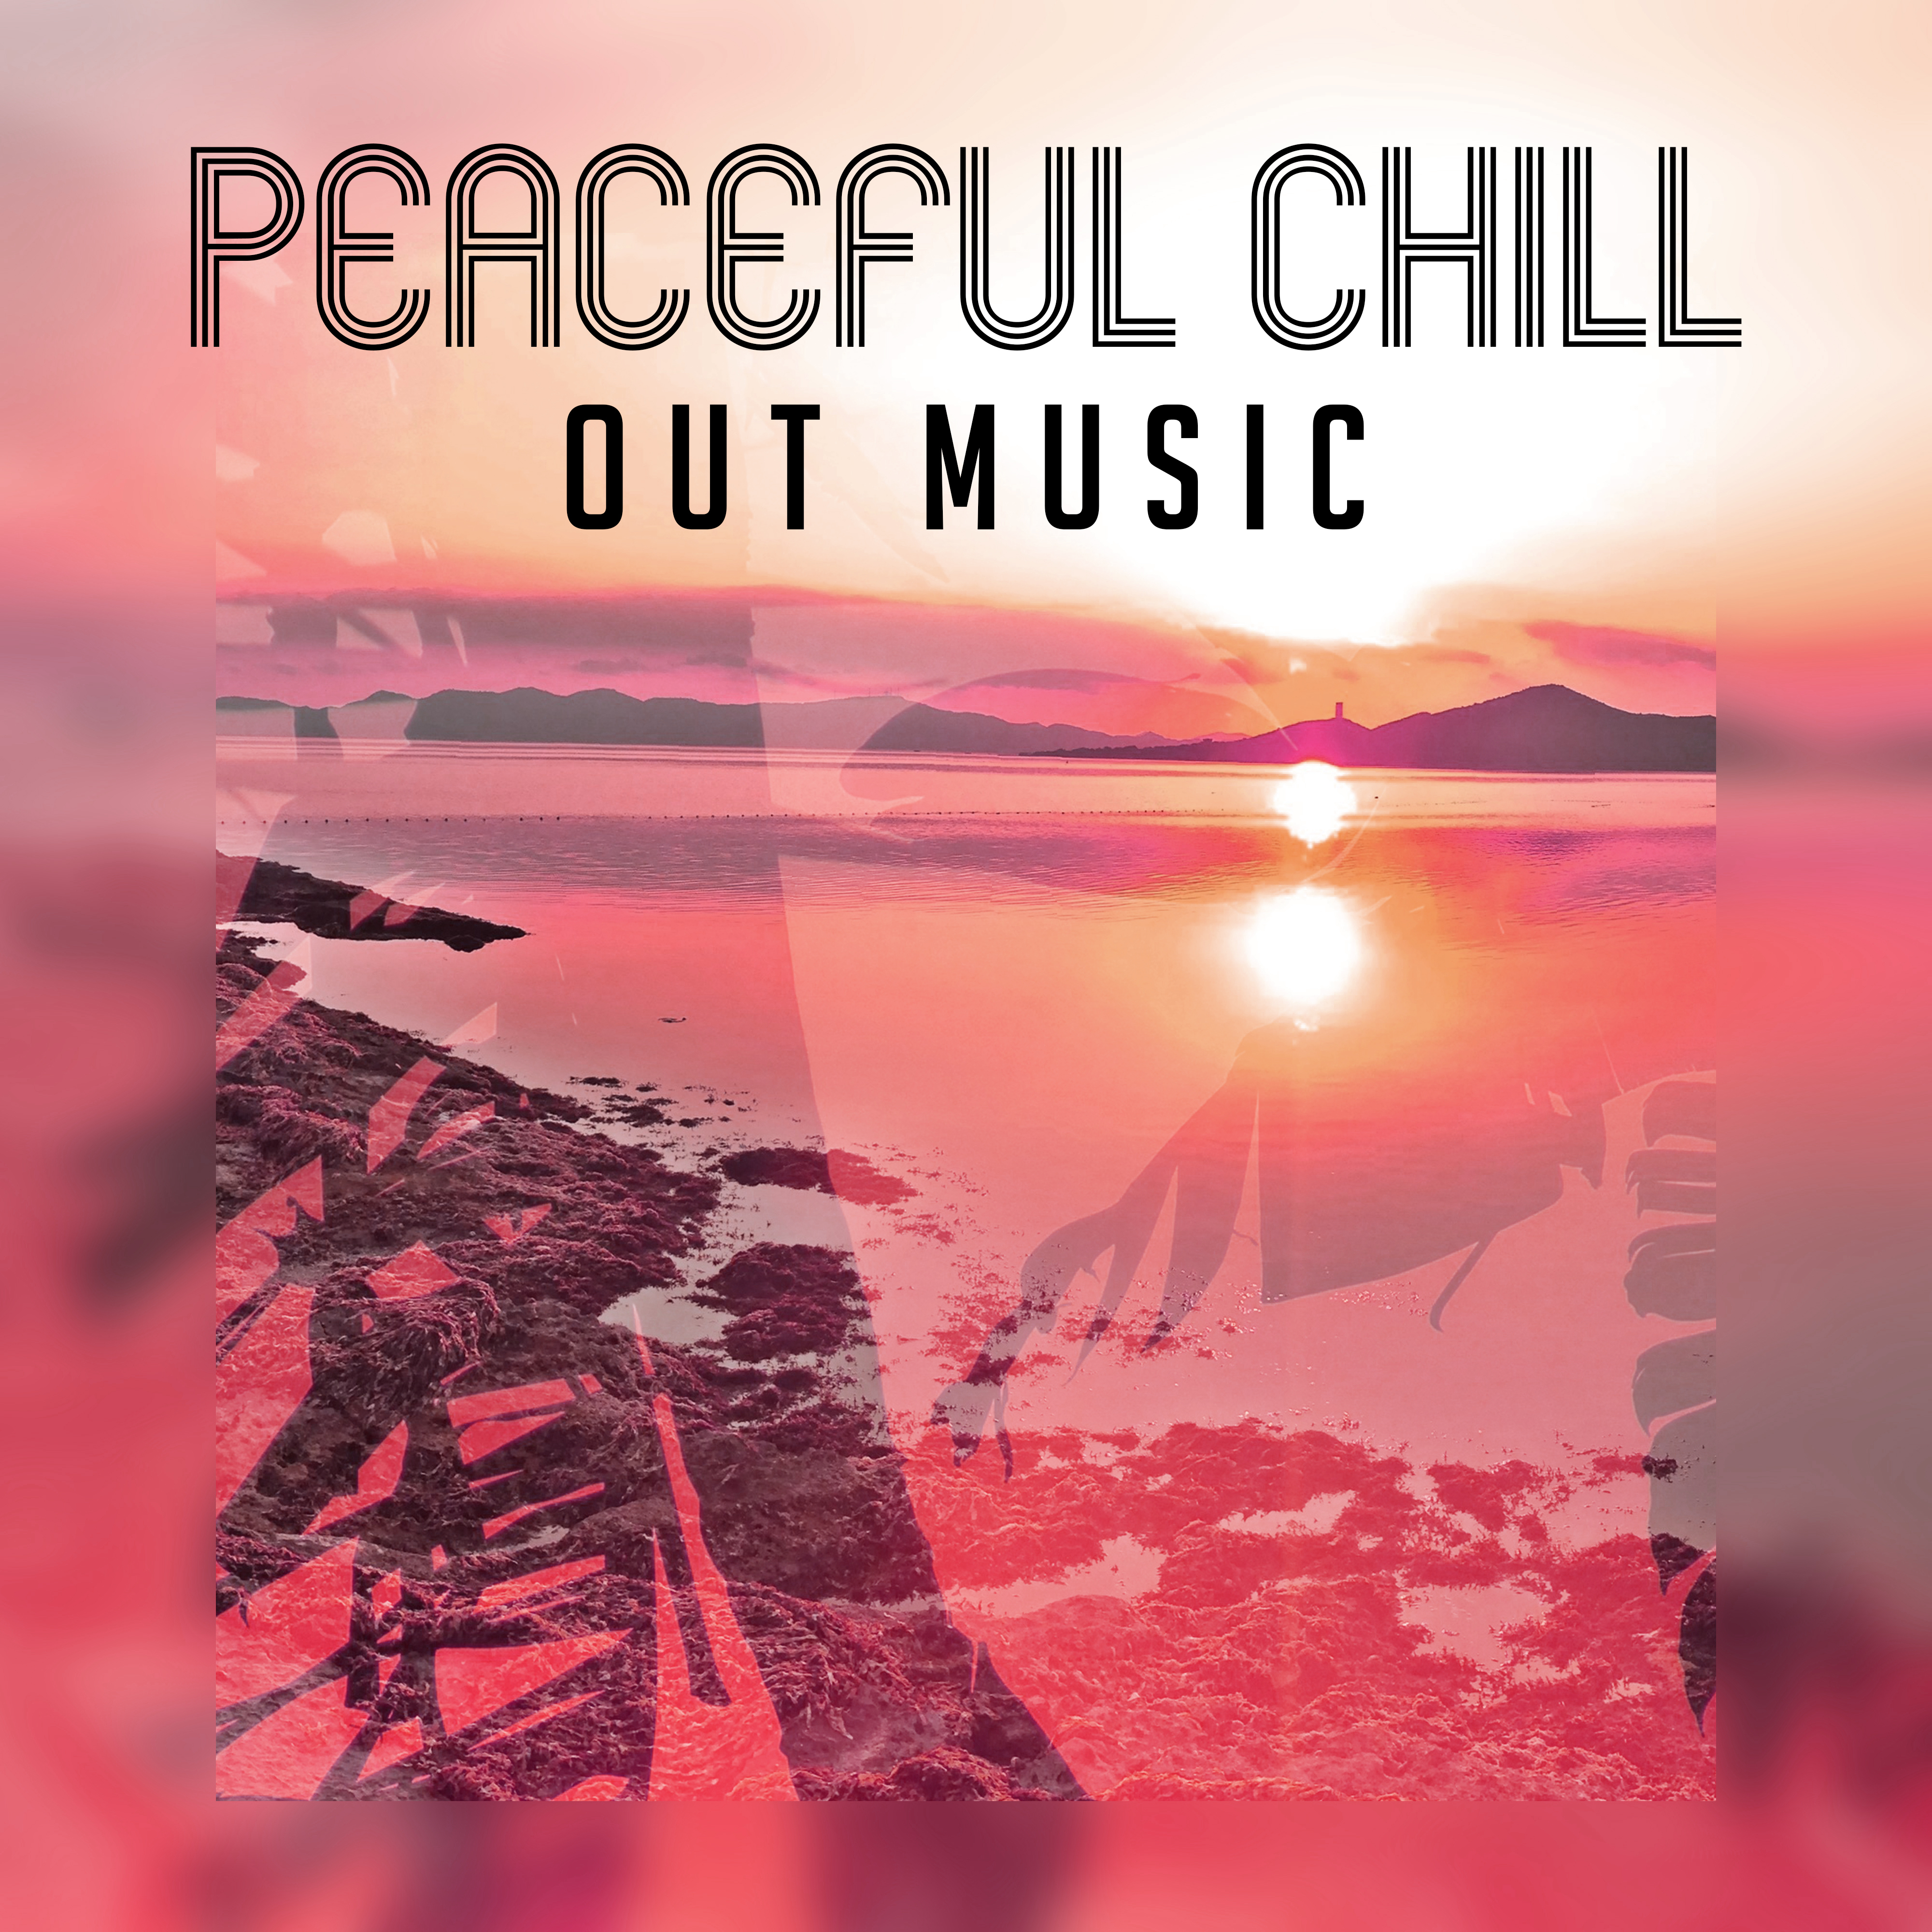 Peaceful Chill Out Music – Calming Chill Songs, Beach House Lounge, Electronic Vibes, Summer Rest